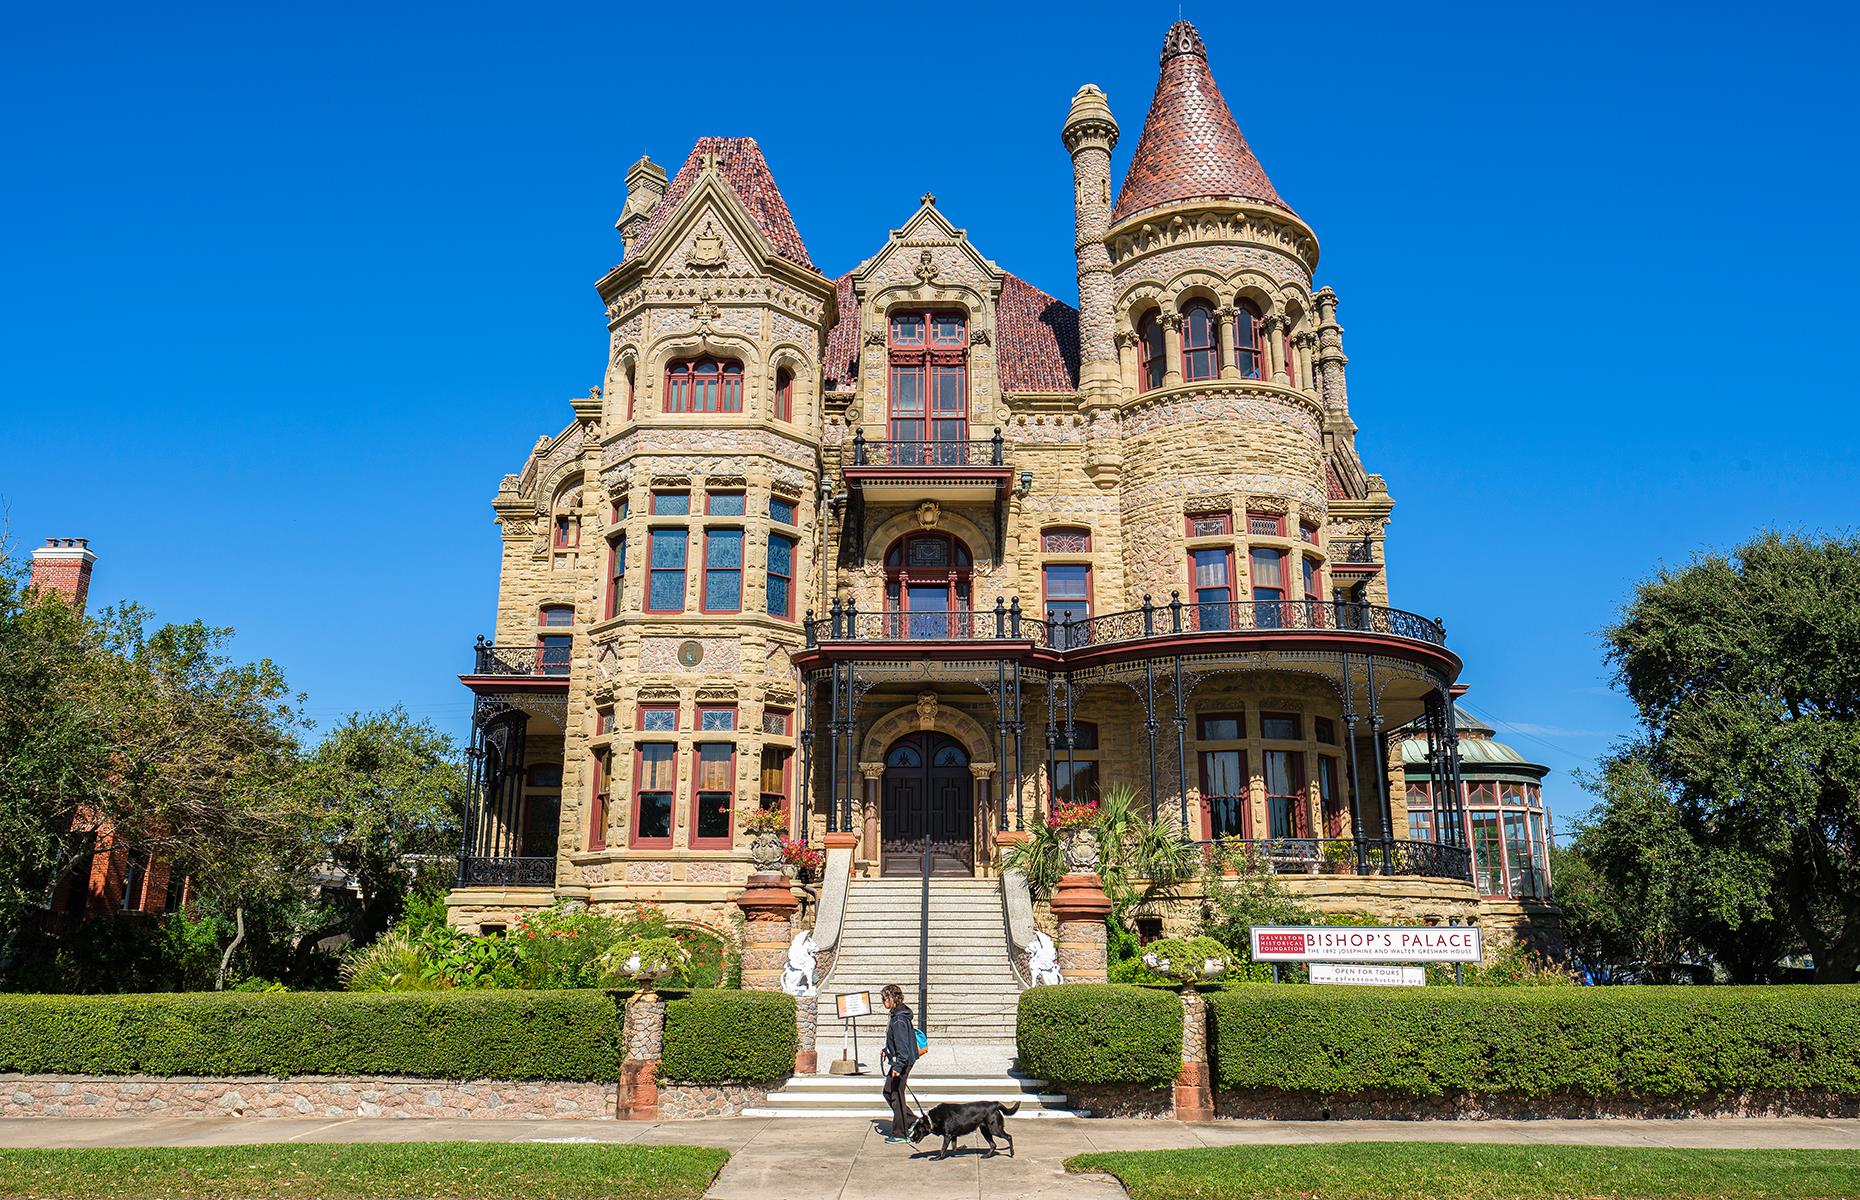 <p>It’s a little small for a palace, but this beloved Galveston property is deserving of its name. Built in 1892, the <a href="https://www.galvestonhistory.org/sites/1892-bishops-palace">Bishop's Palace</a> is an impressive example of Victorian architecture, with its red turrets, gargoyles and bold, circular towers. It was the brainchild of celebrated Galveston architect Nicholas Clayton, who built many of the city’s most beautiful buildings. Still a great source of city pride and now on the National Register of Historic Places, it's open for tours and occasionally for special events, such as high tea.</p>